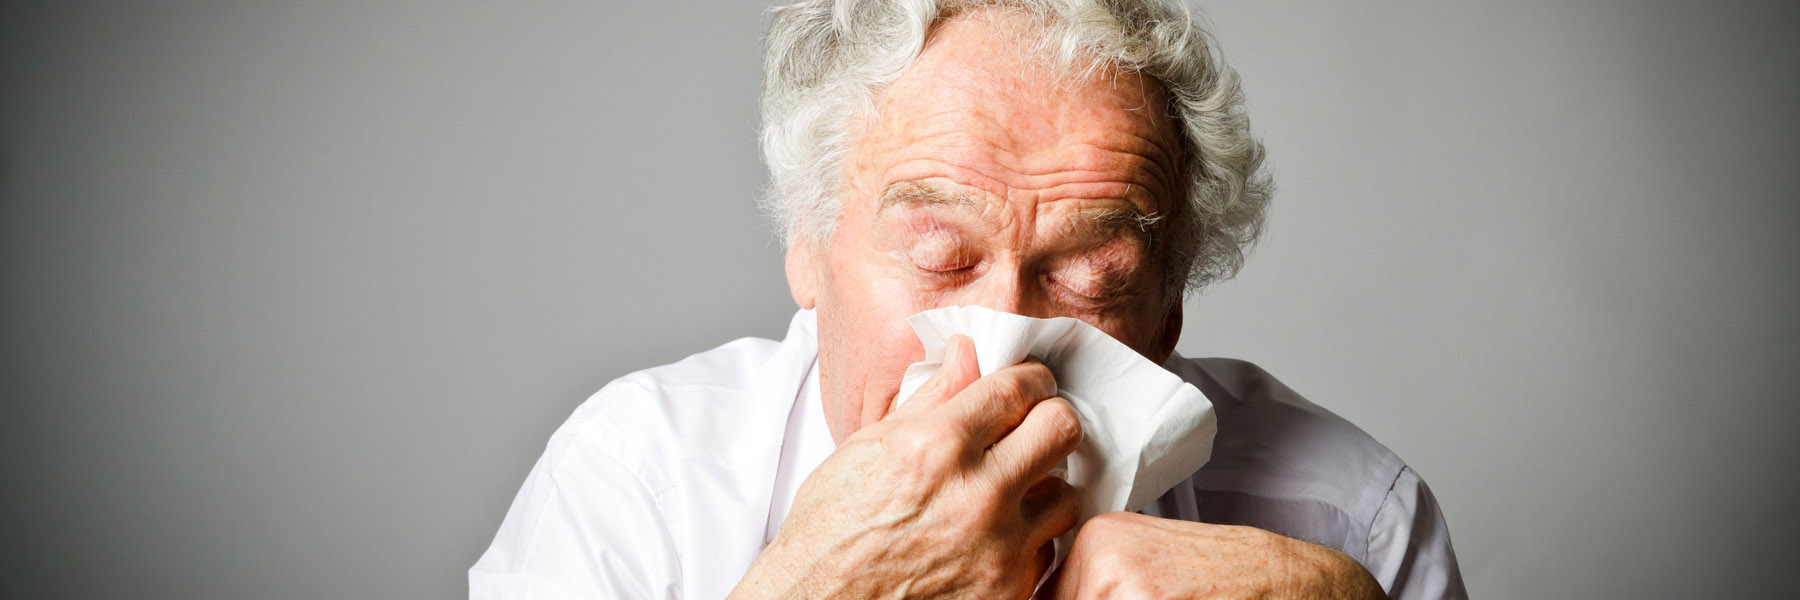 Man with runny nose using a tissue